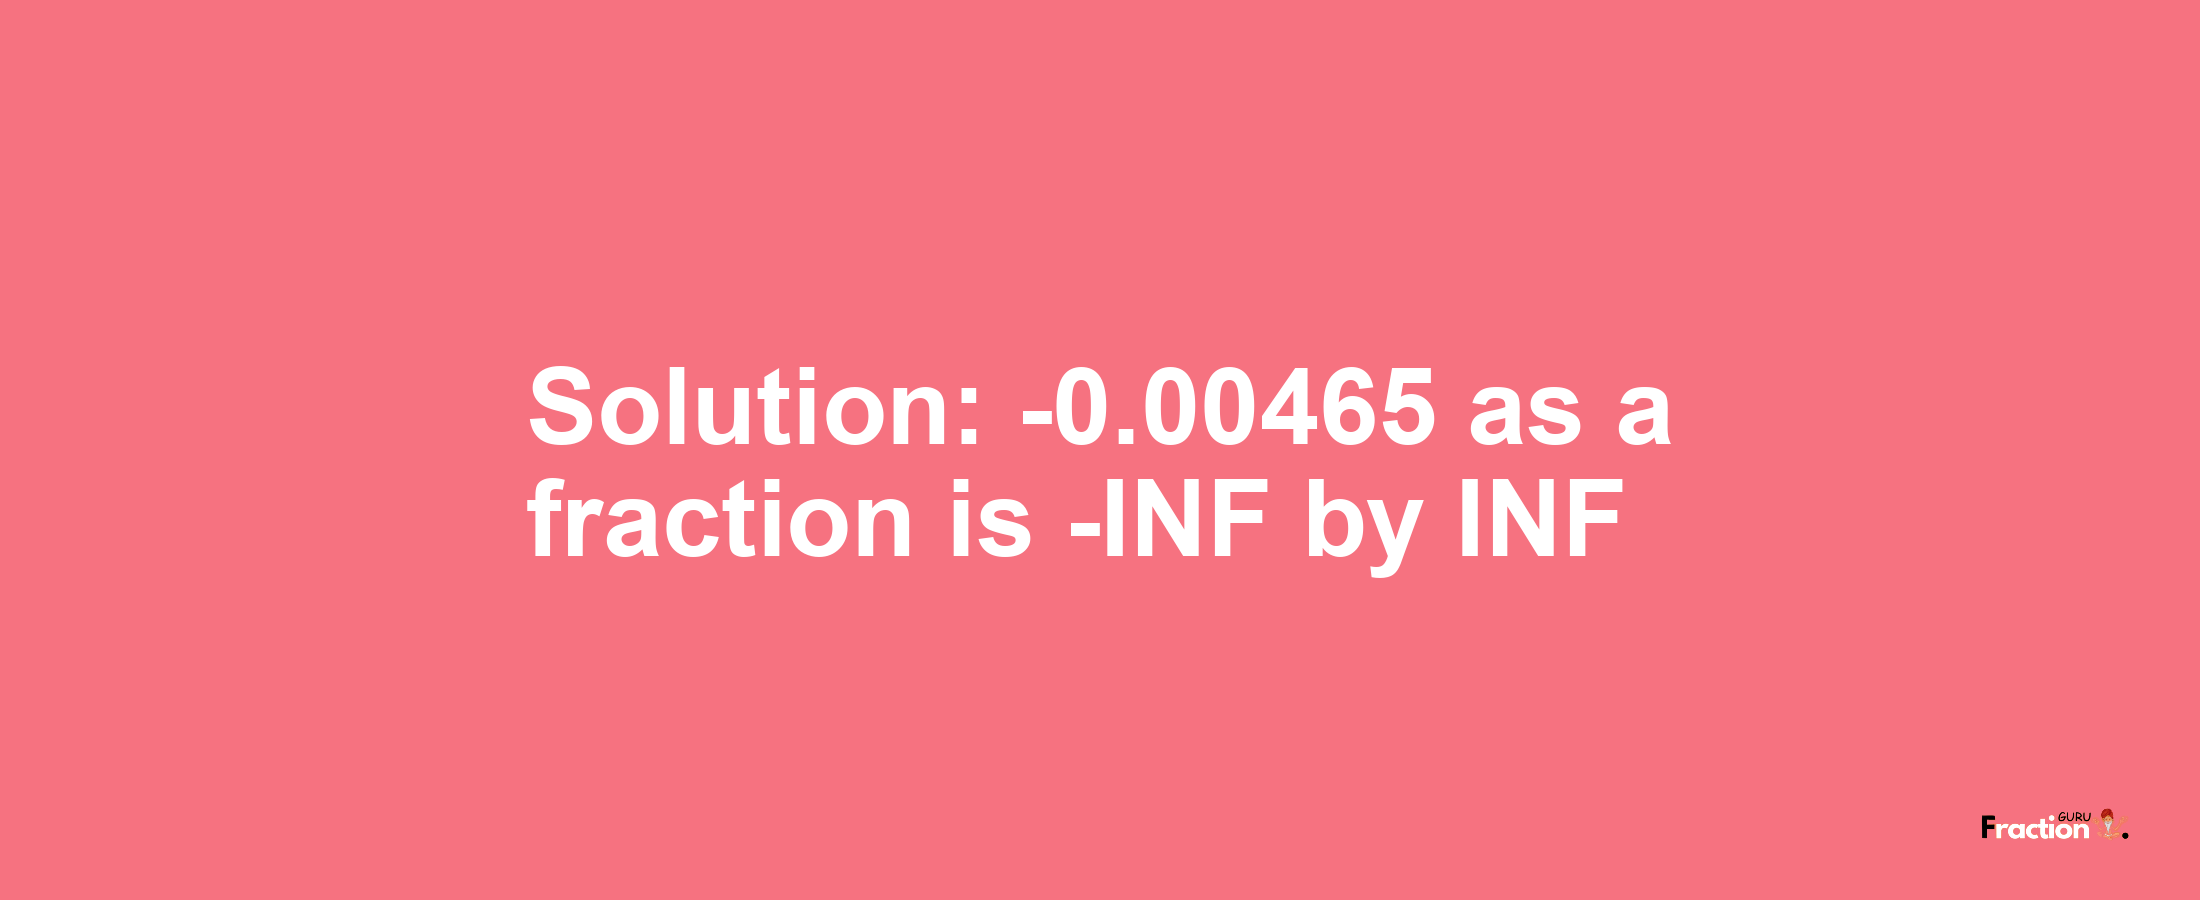 Solution:-0.00465 as a fraction is -INF/INF